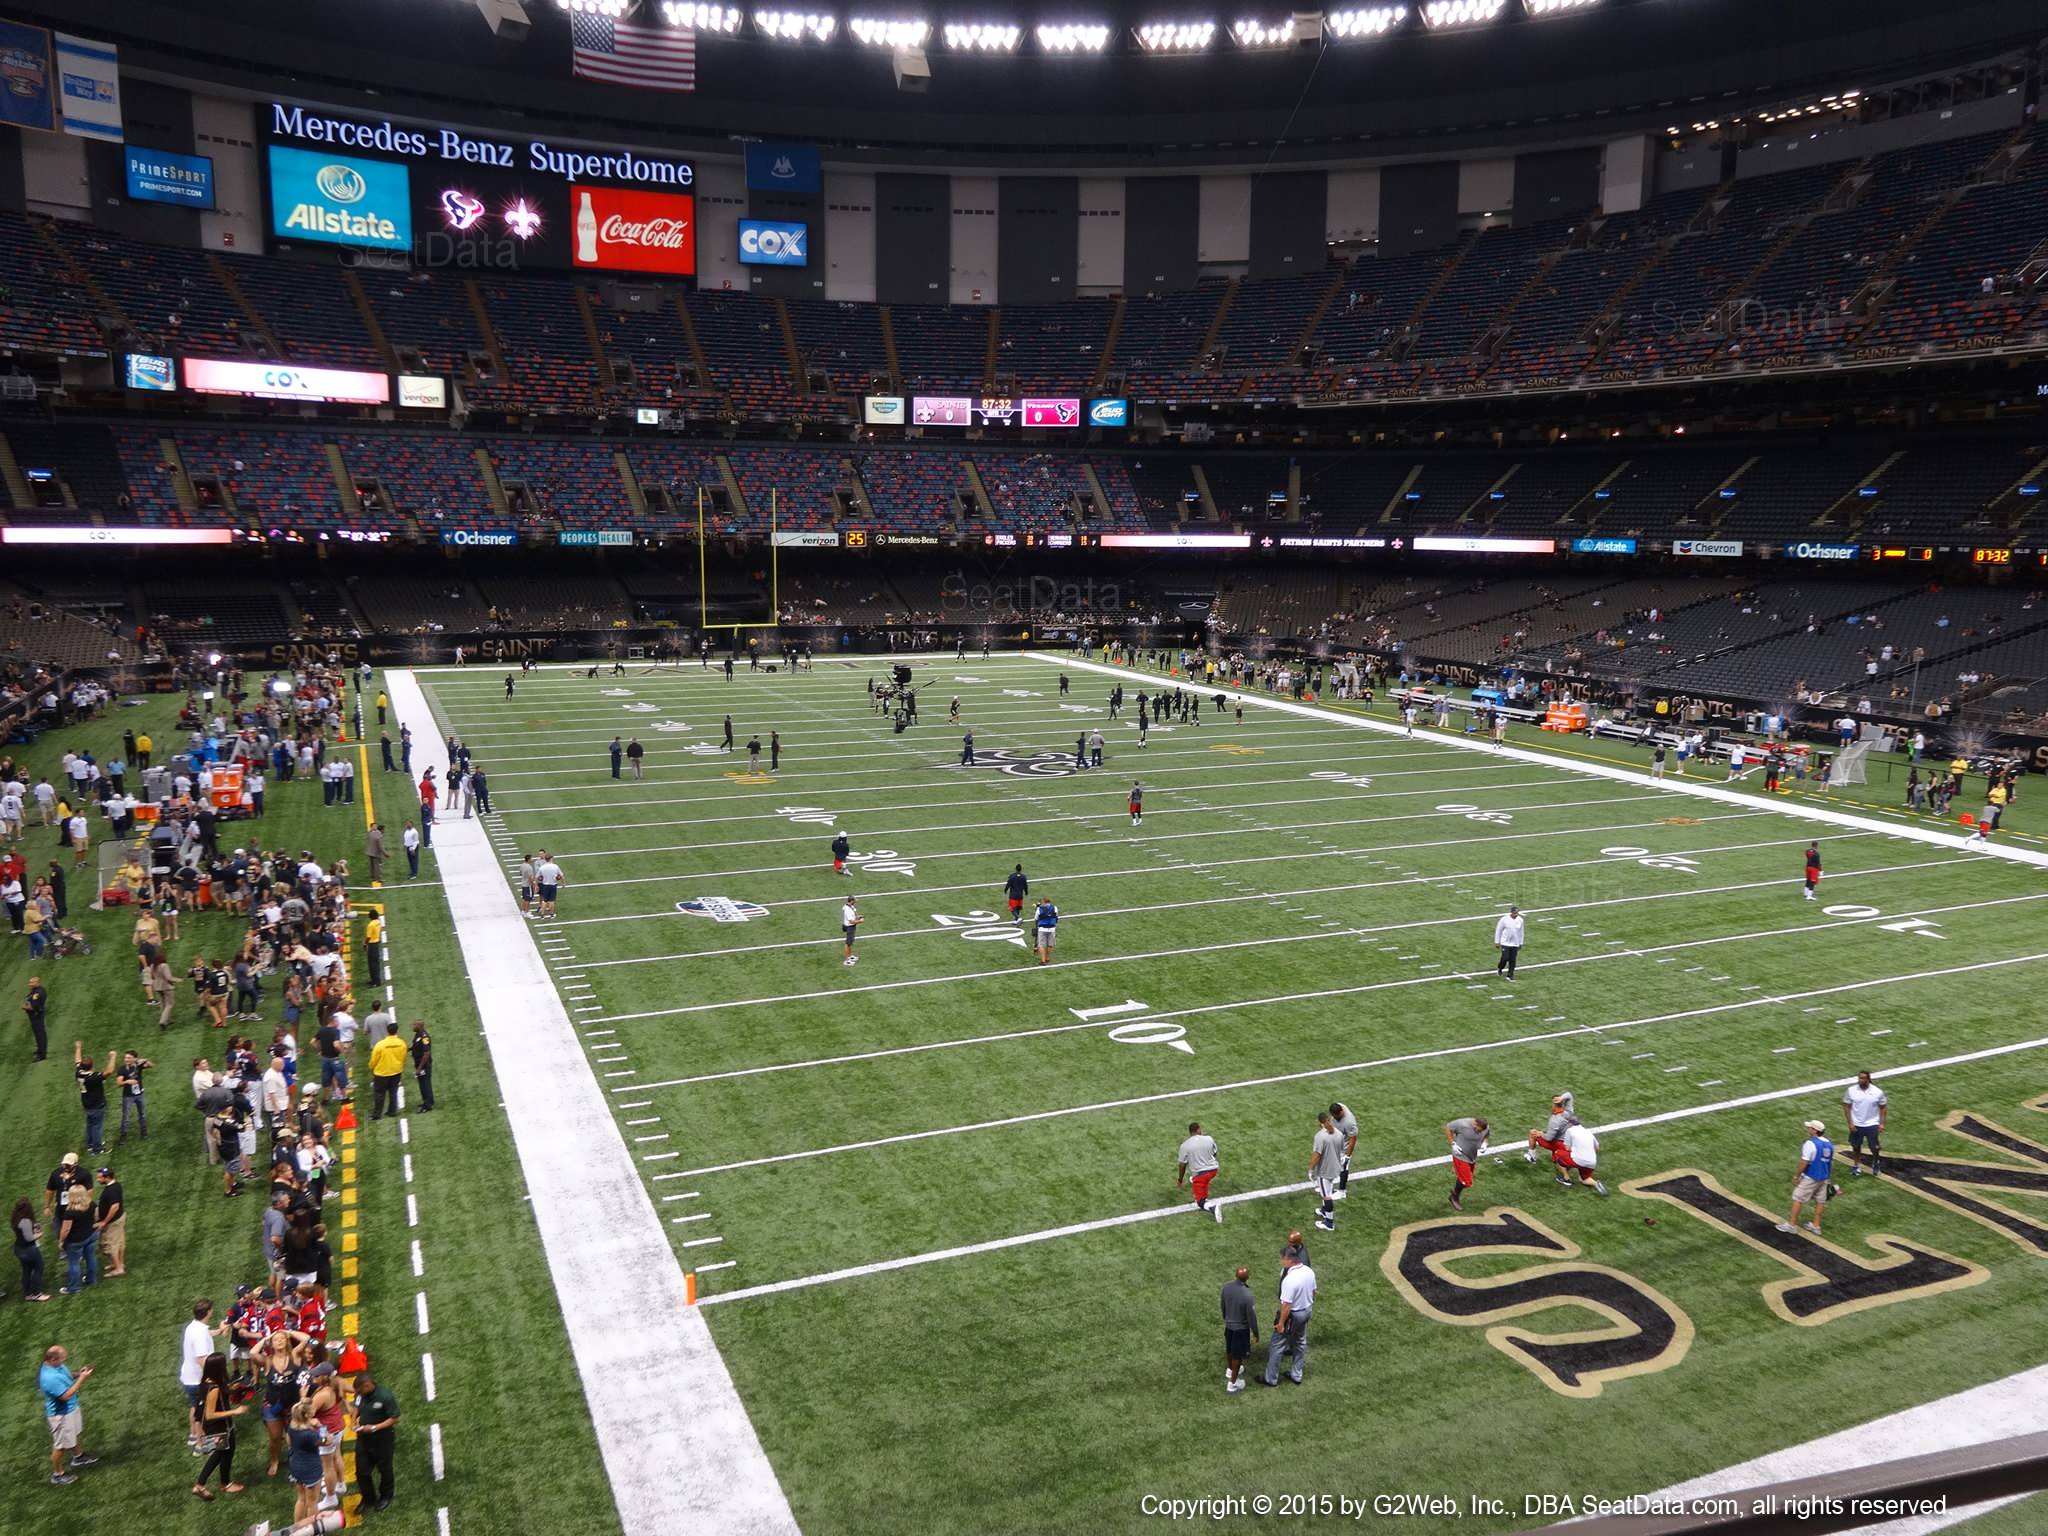 Seat view from section 205 at the Mercedes-Benz Superdome, home of the New Orleans Saints